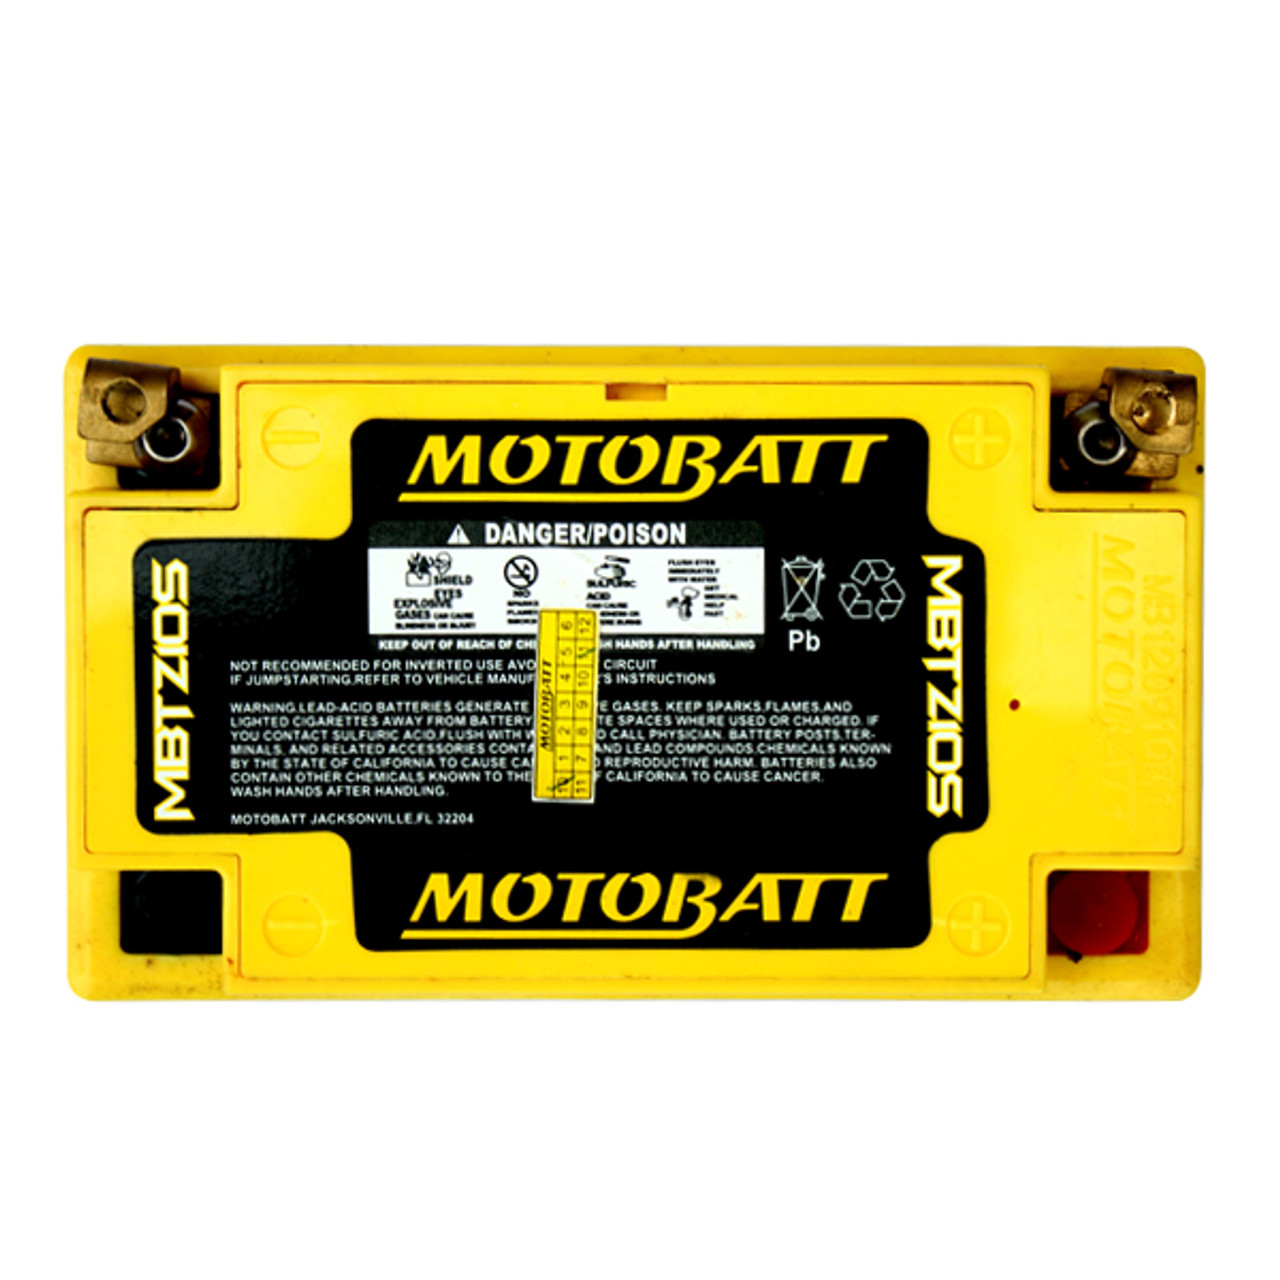 Yuasa YTX7A-BS Battery Replacement - AGM Sealed for Motorcycle